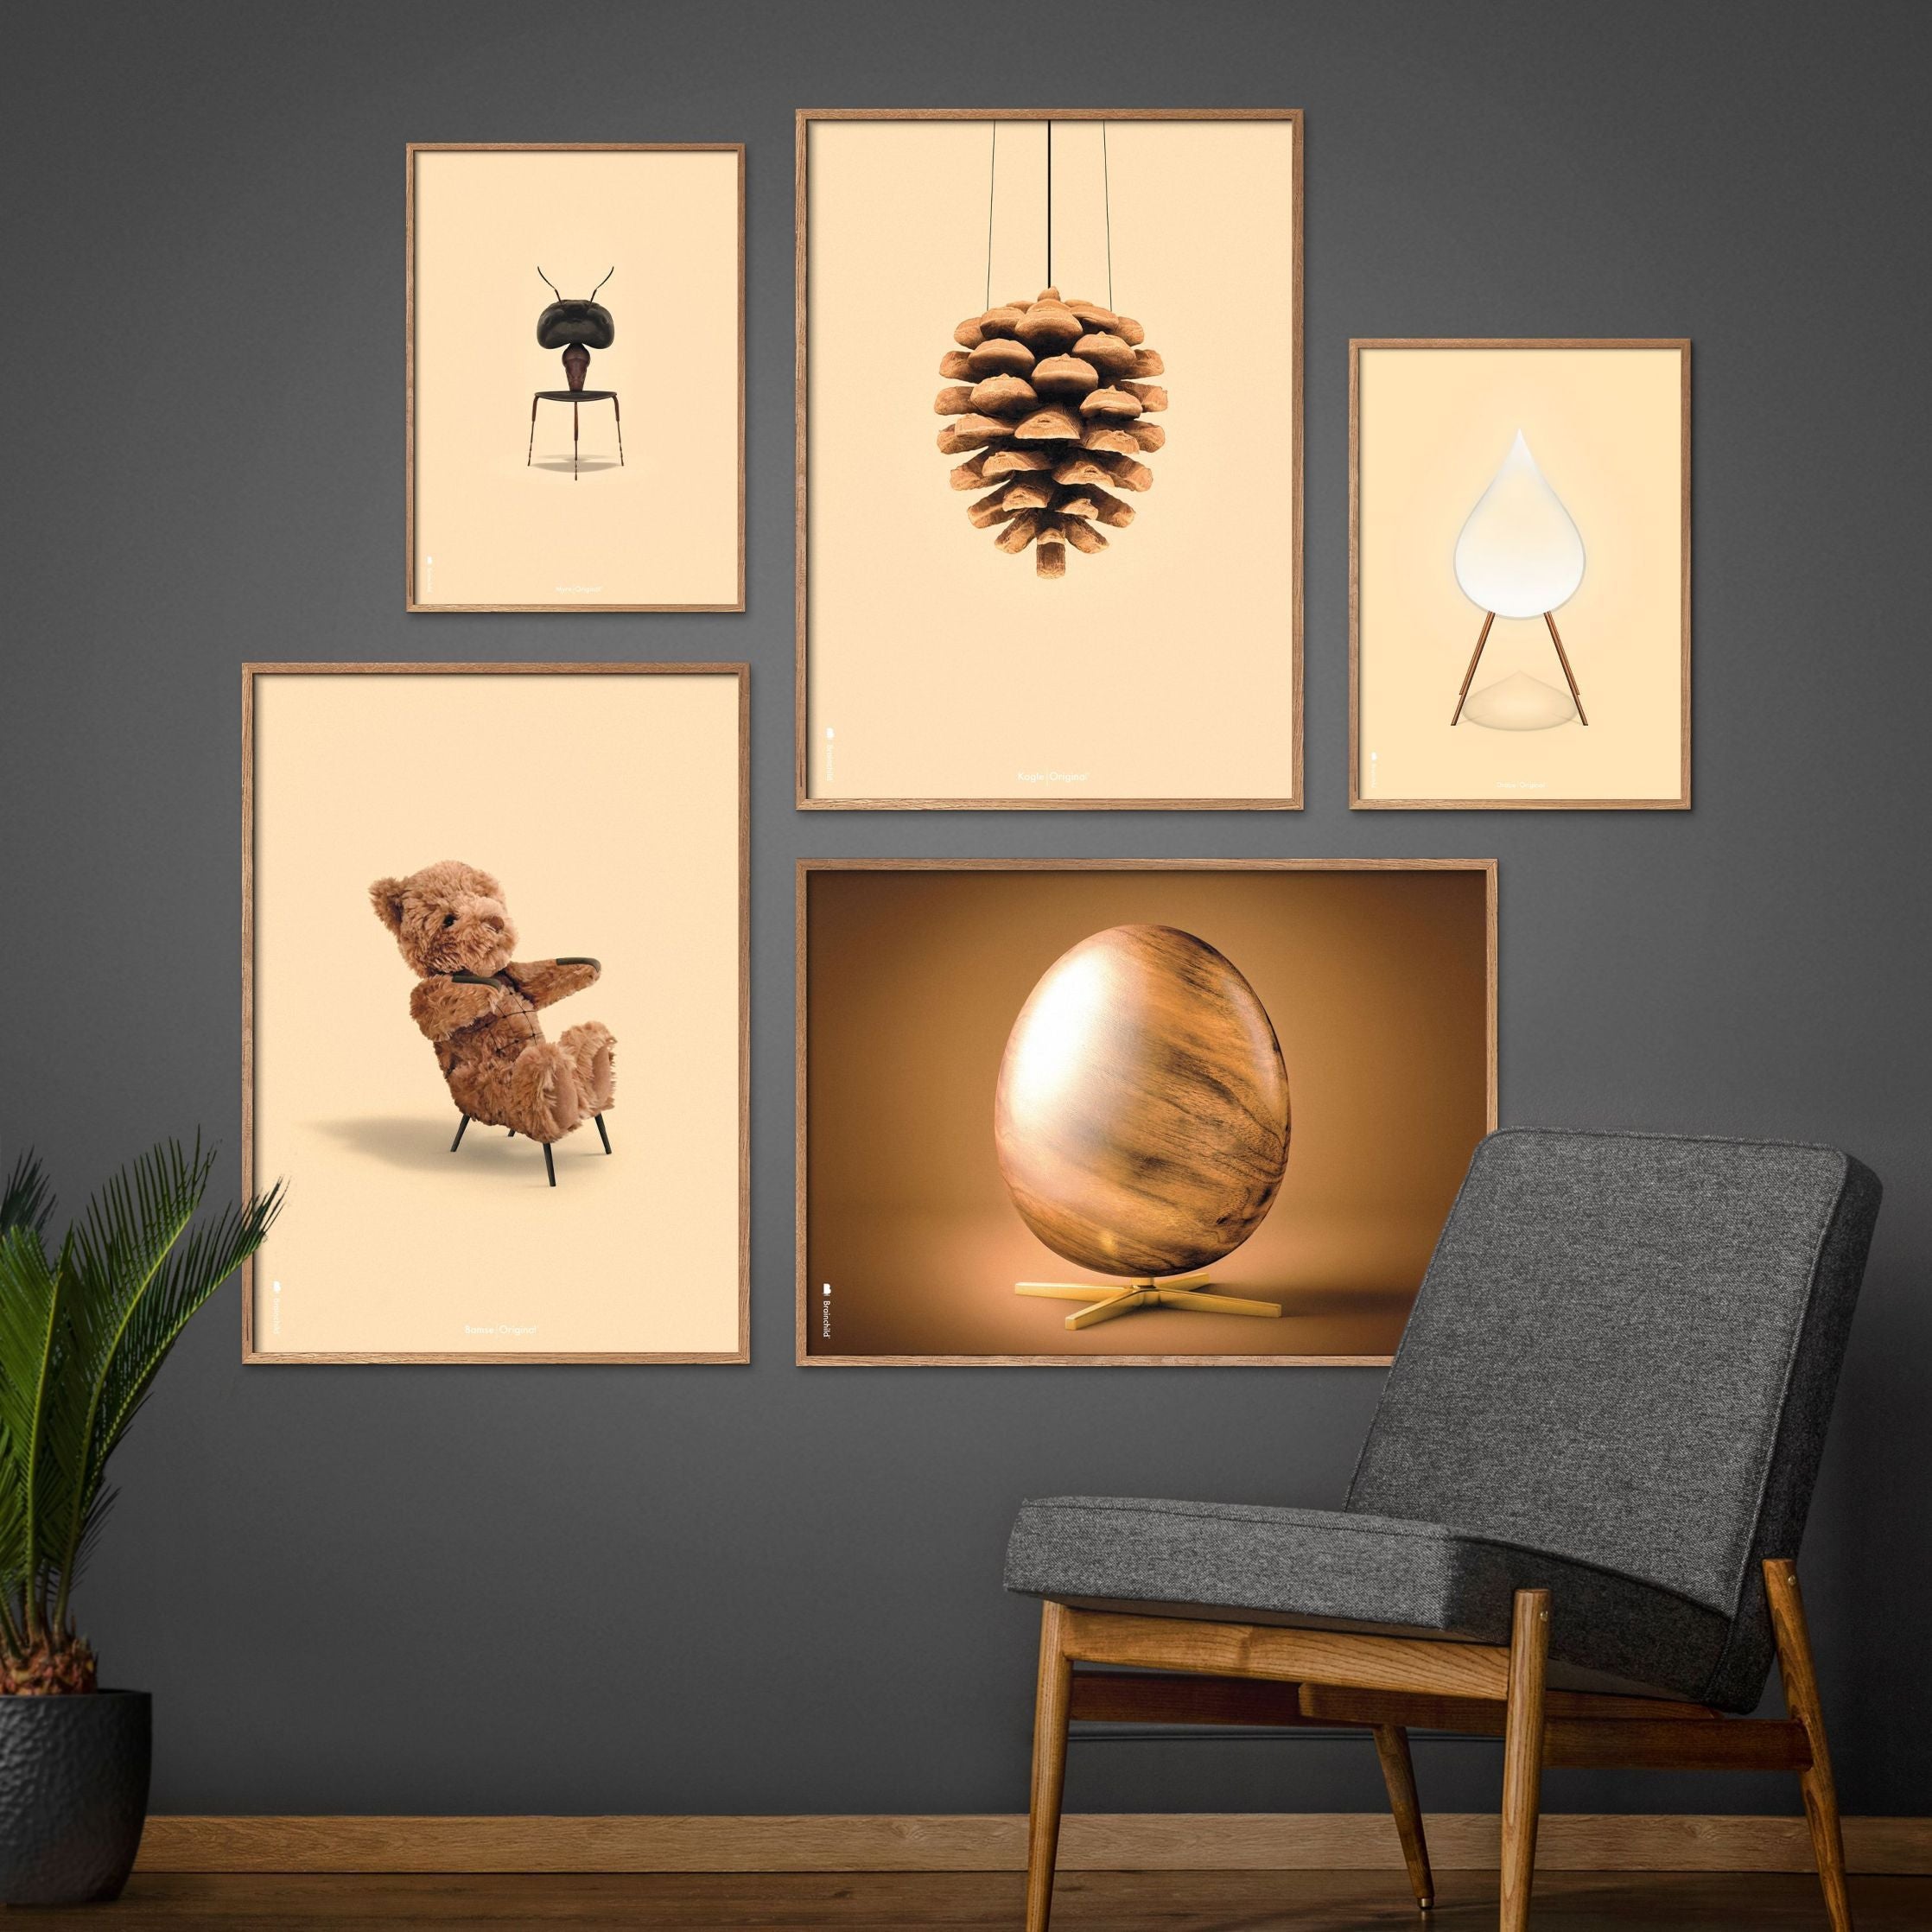 Brainchild Pine Cone Classic Poster, Frame Made Of Dark Wood 50x70 Cm, Sand Colored Background